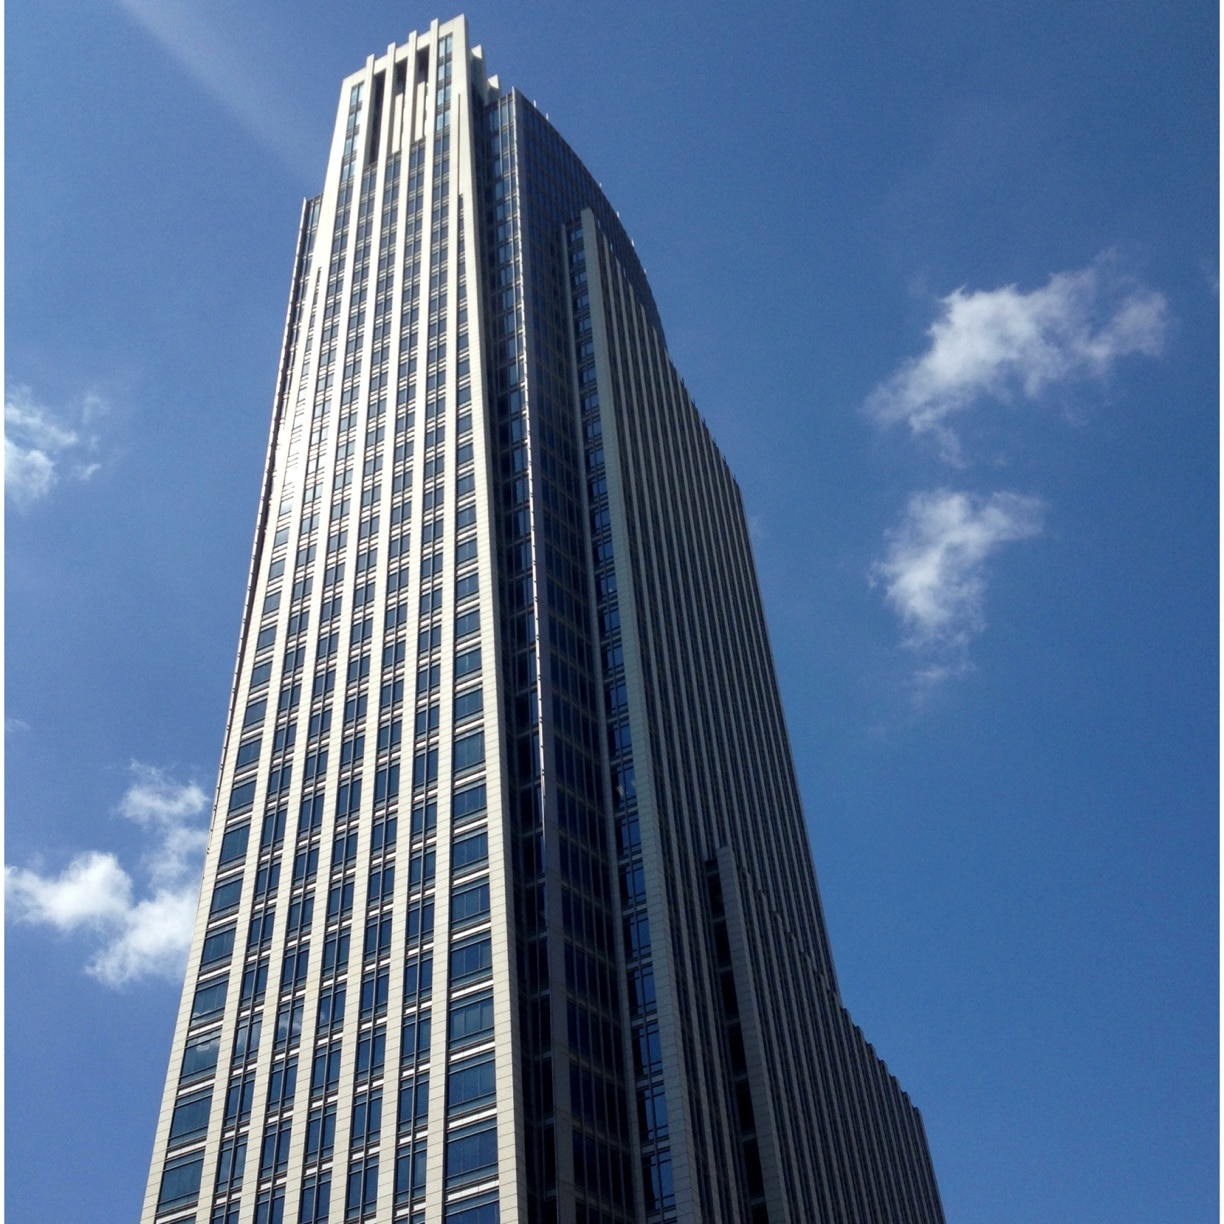 The tallest skyscraper in Nebraska looms over downtown Omaha at a whopping 45 stories tall, opened in 2002.